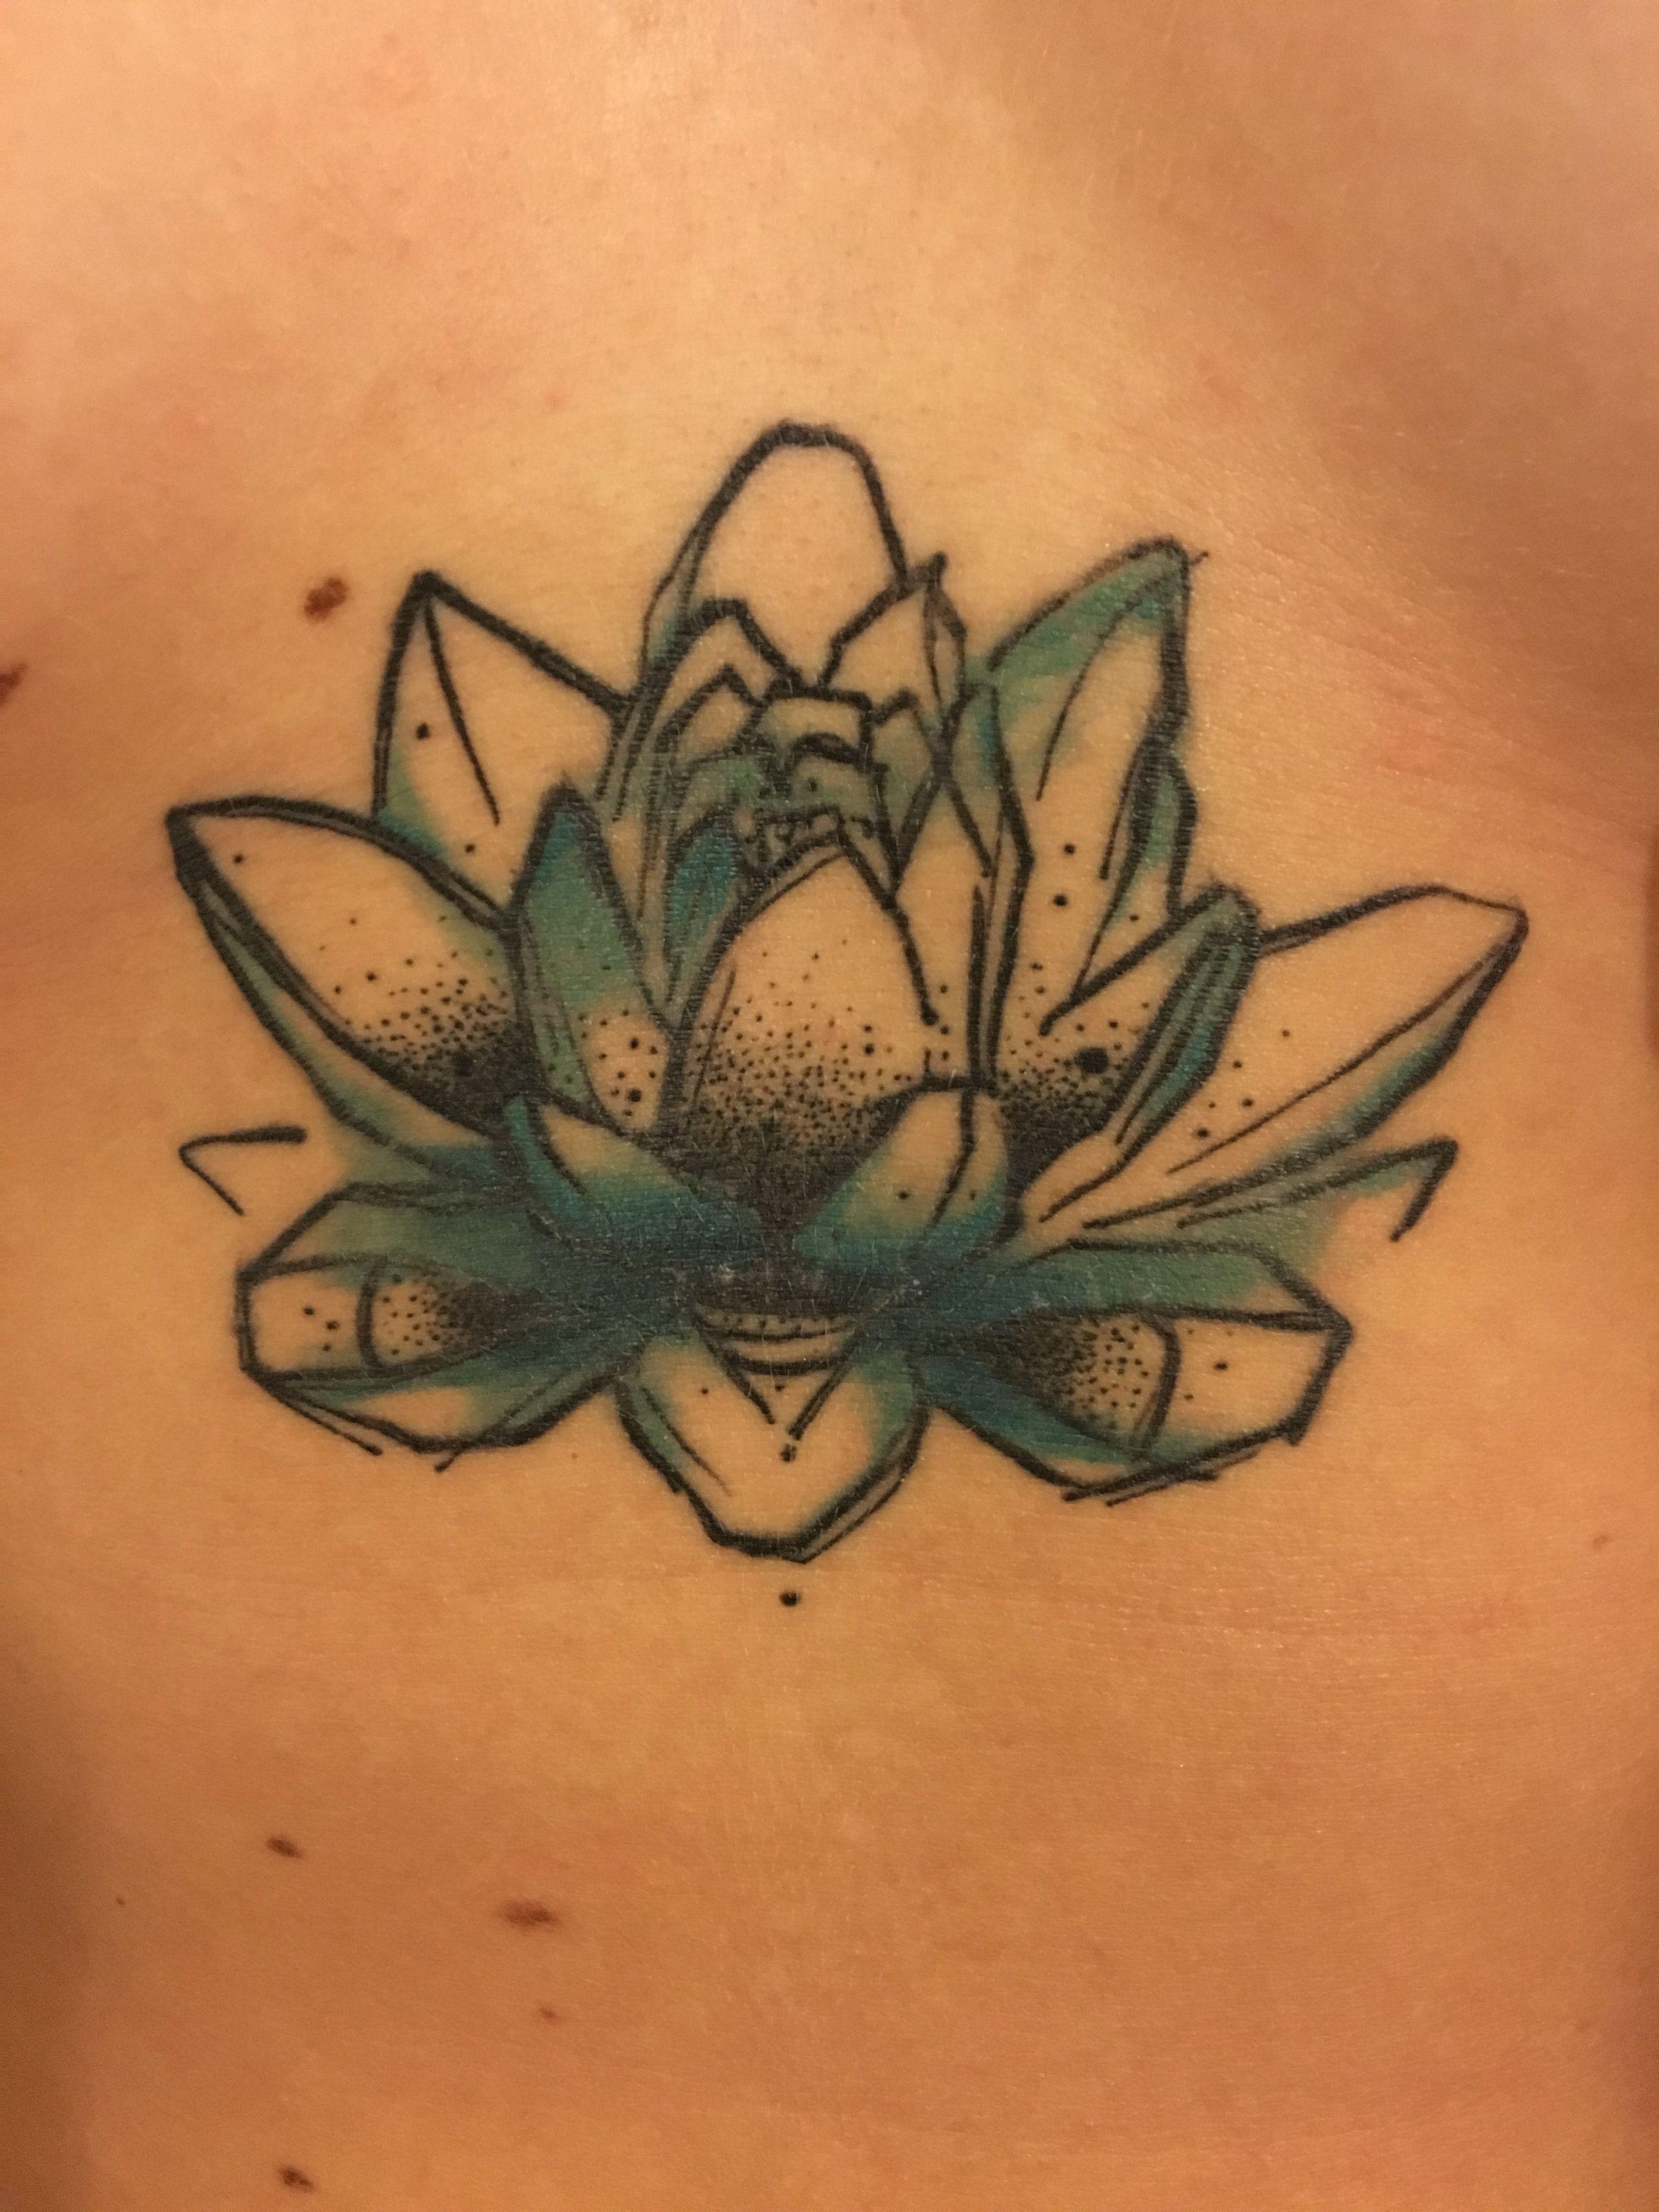 Lotus flower or dragonfly sex position